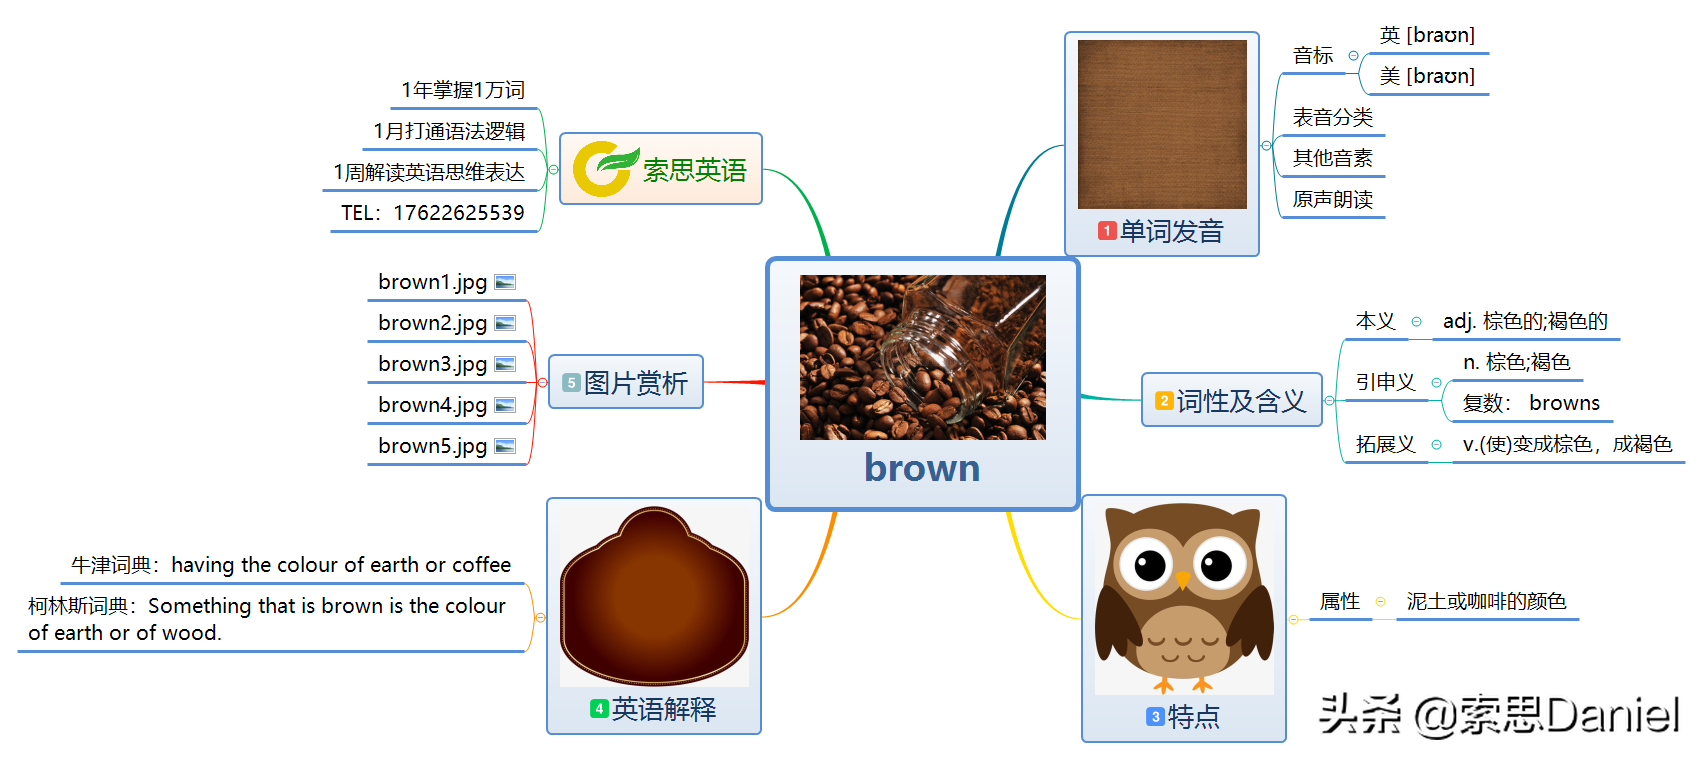 brown怎么读（Ms.Brown怎么读）